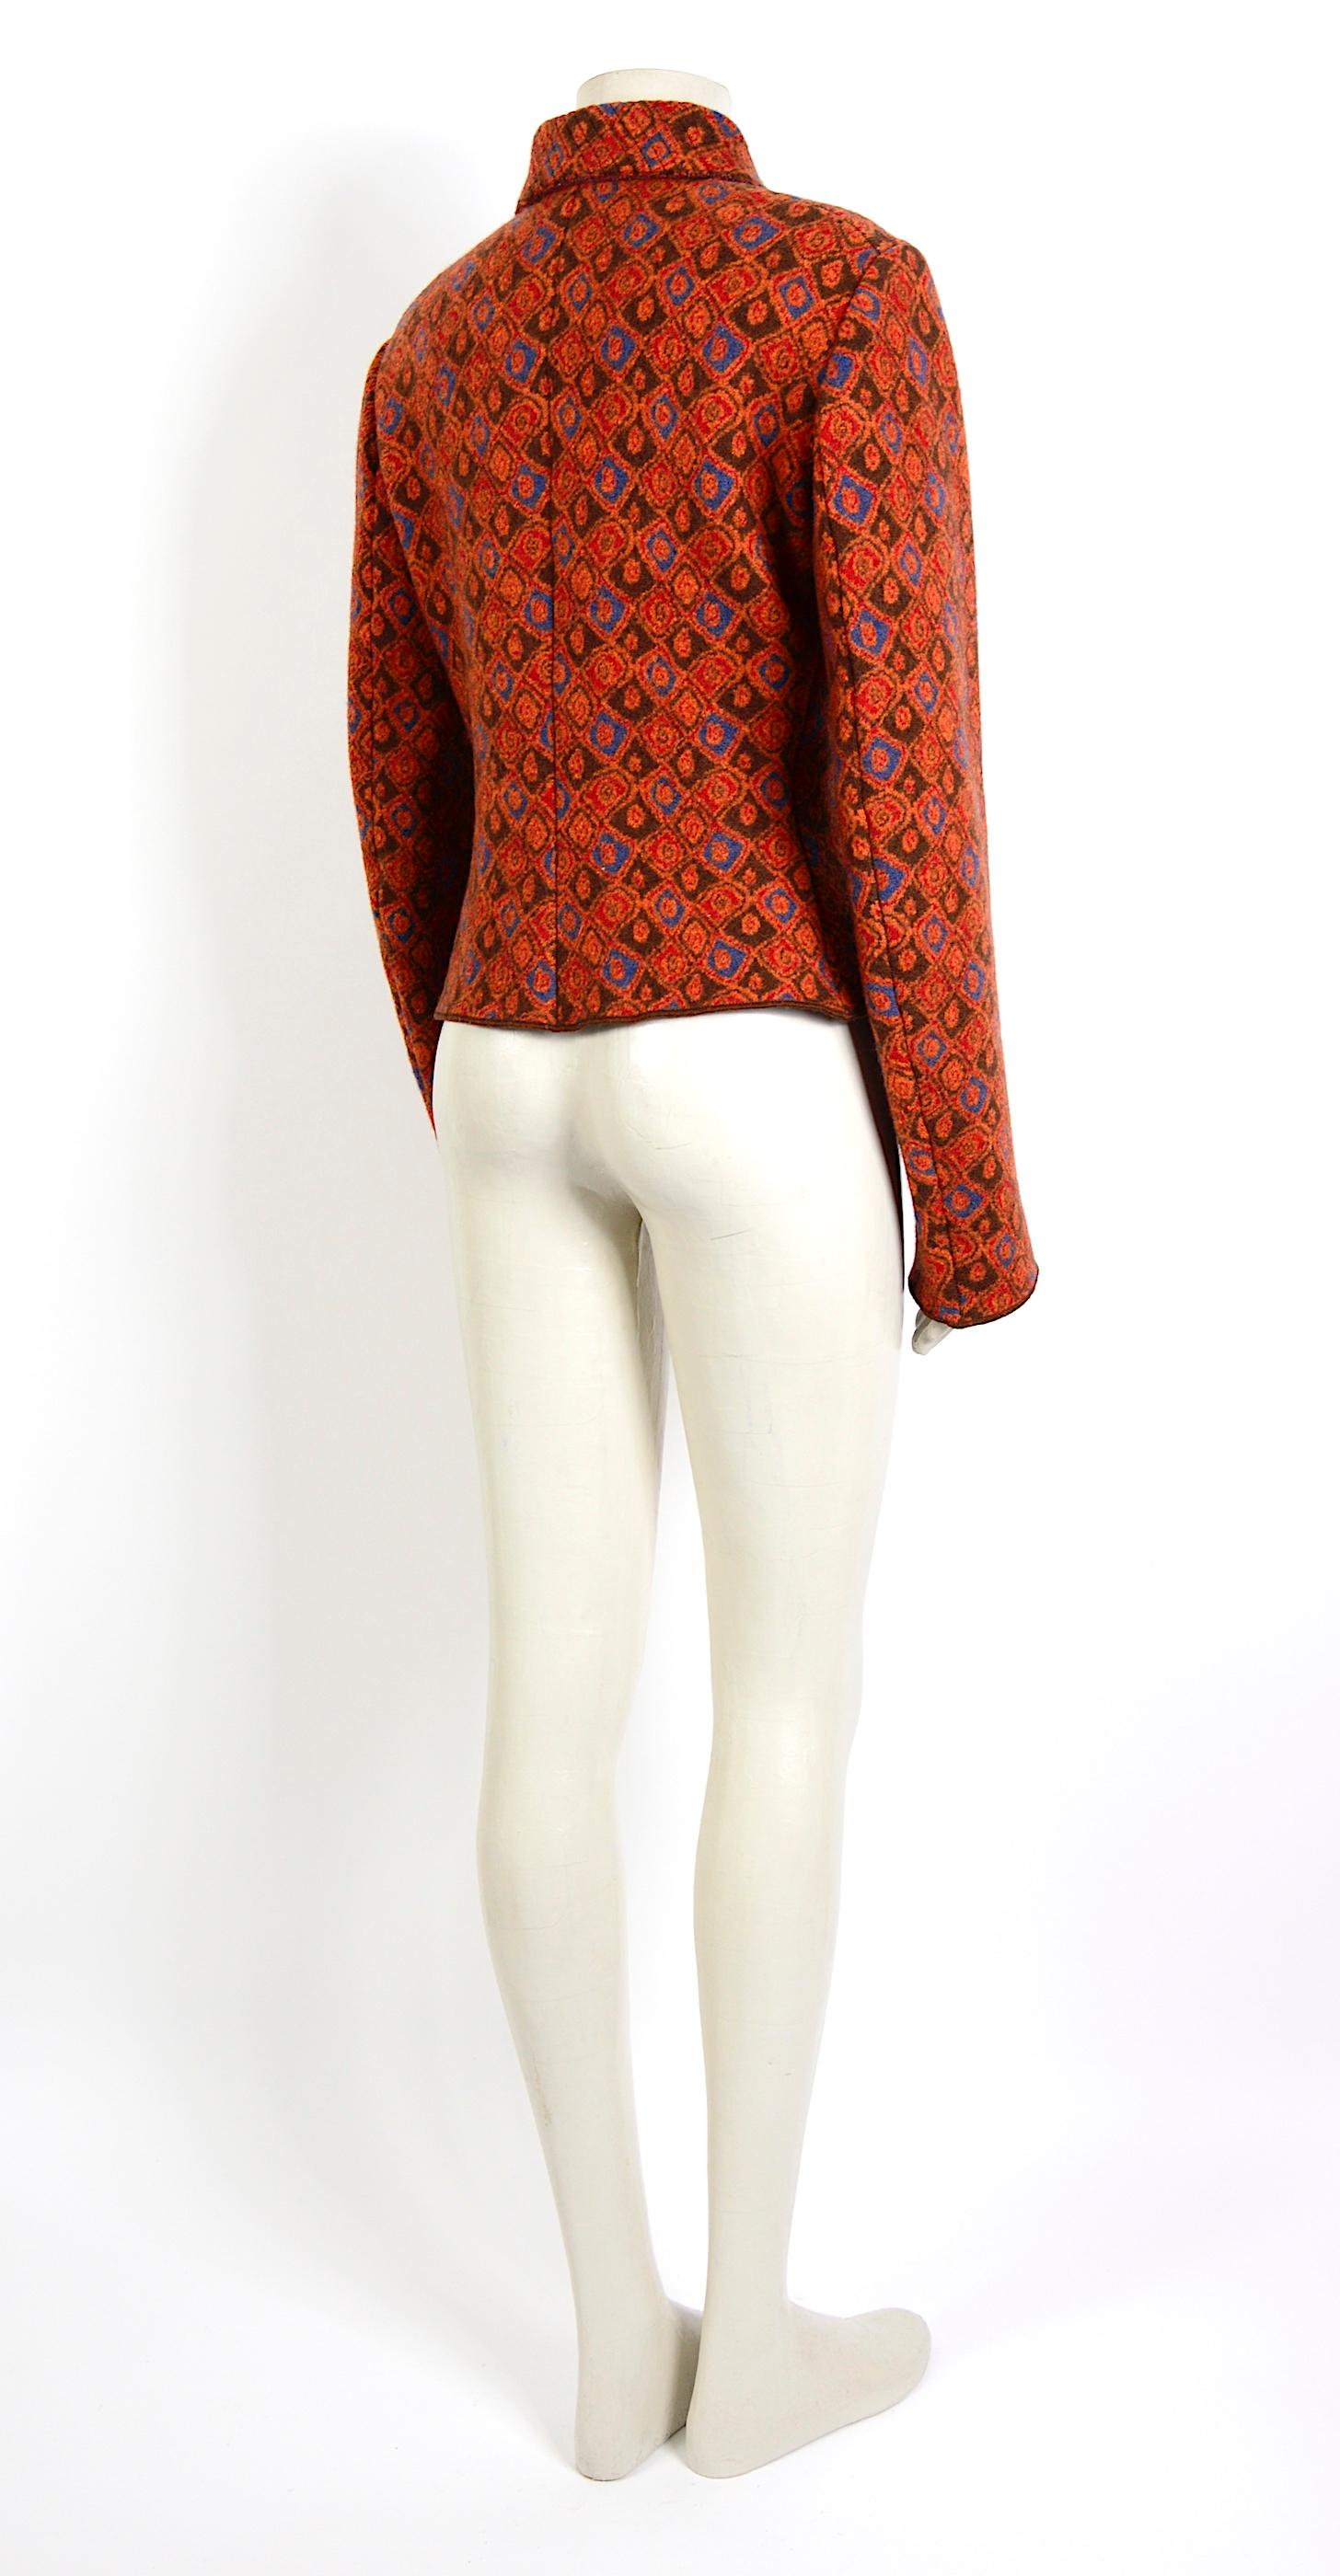 Azzedine Alaia collectors 1990s vintage wool rusted orange patterned jacket In Excellent Condition For Sale In Antwerp, BE